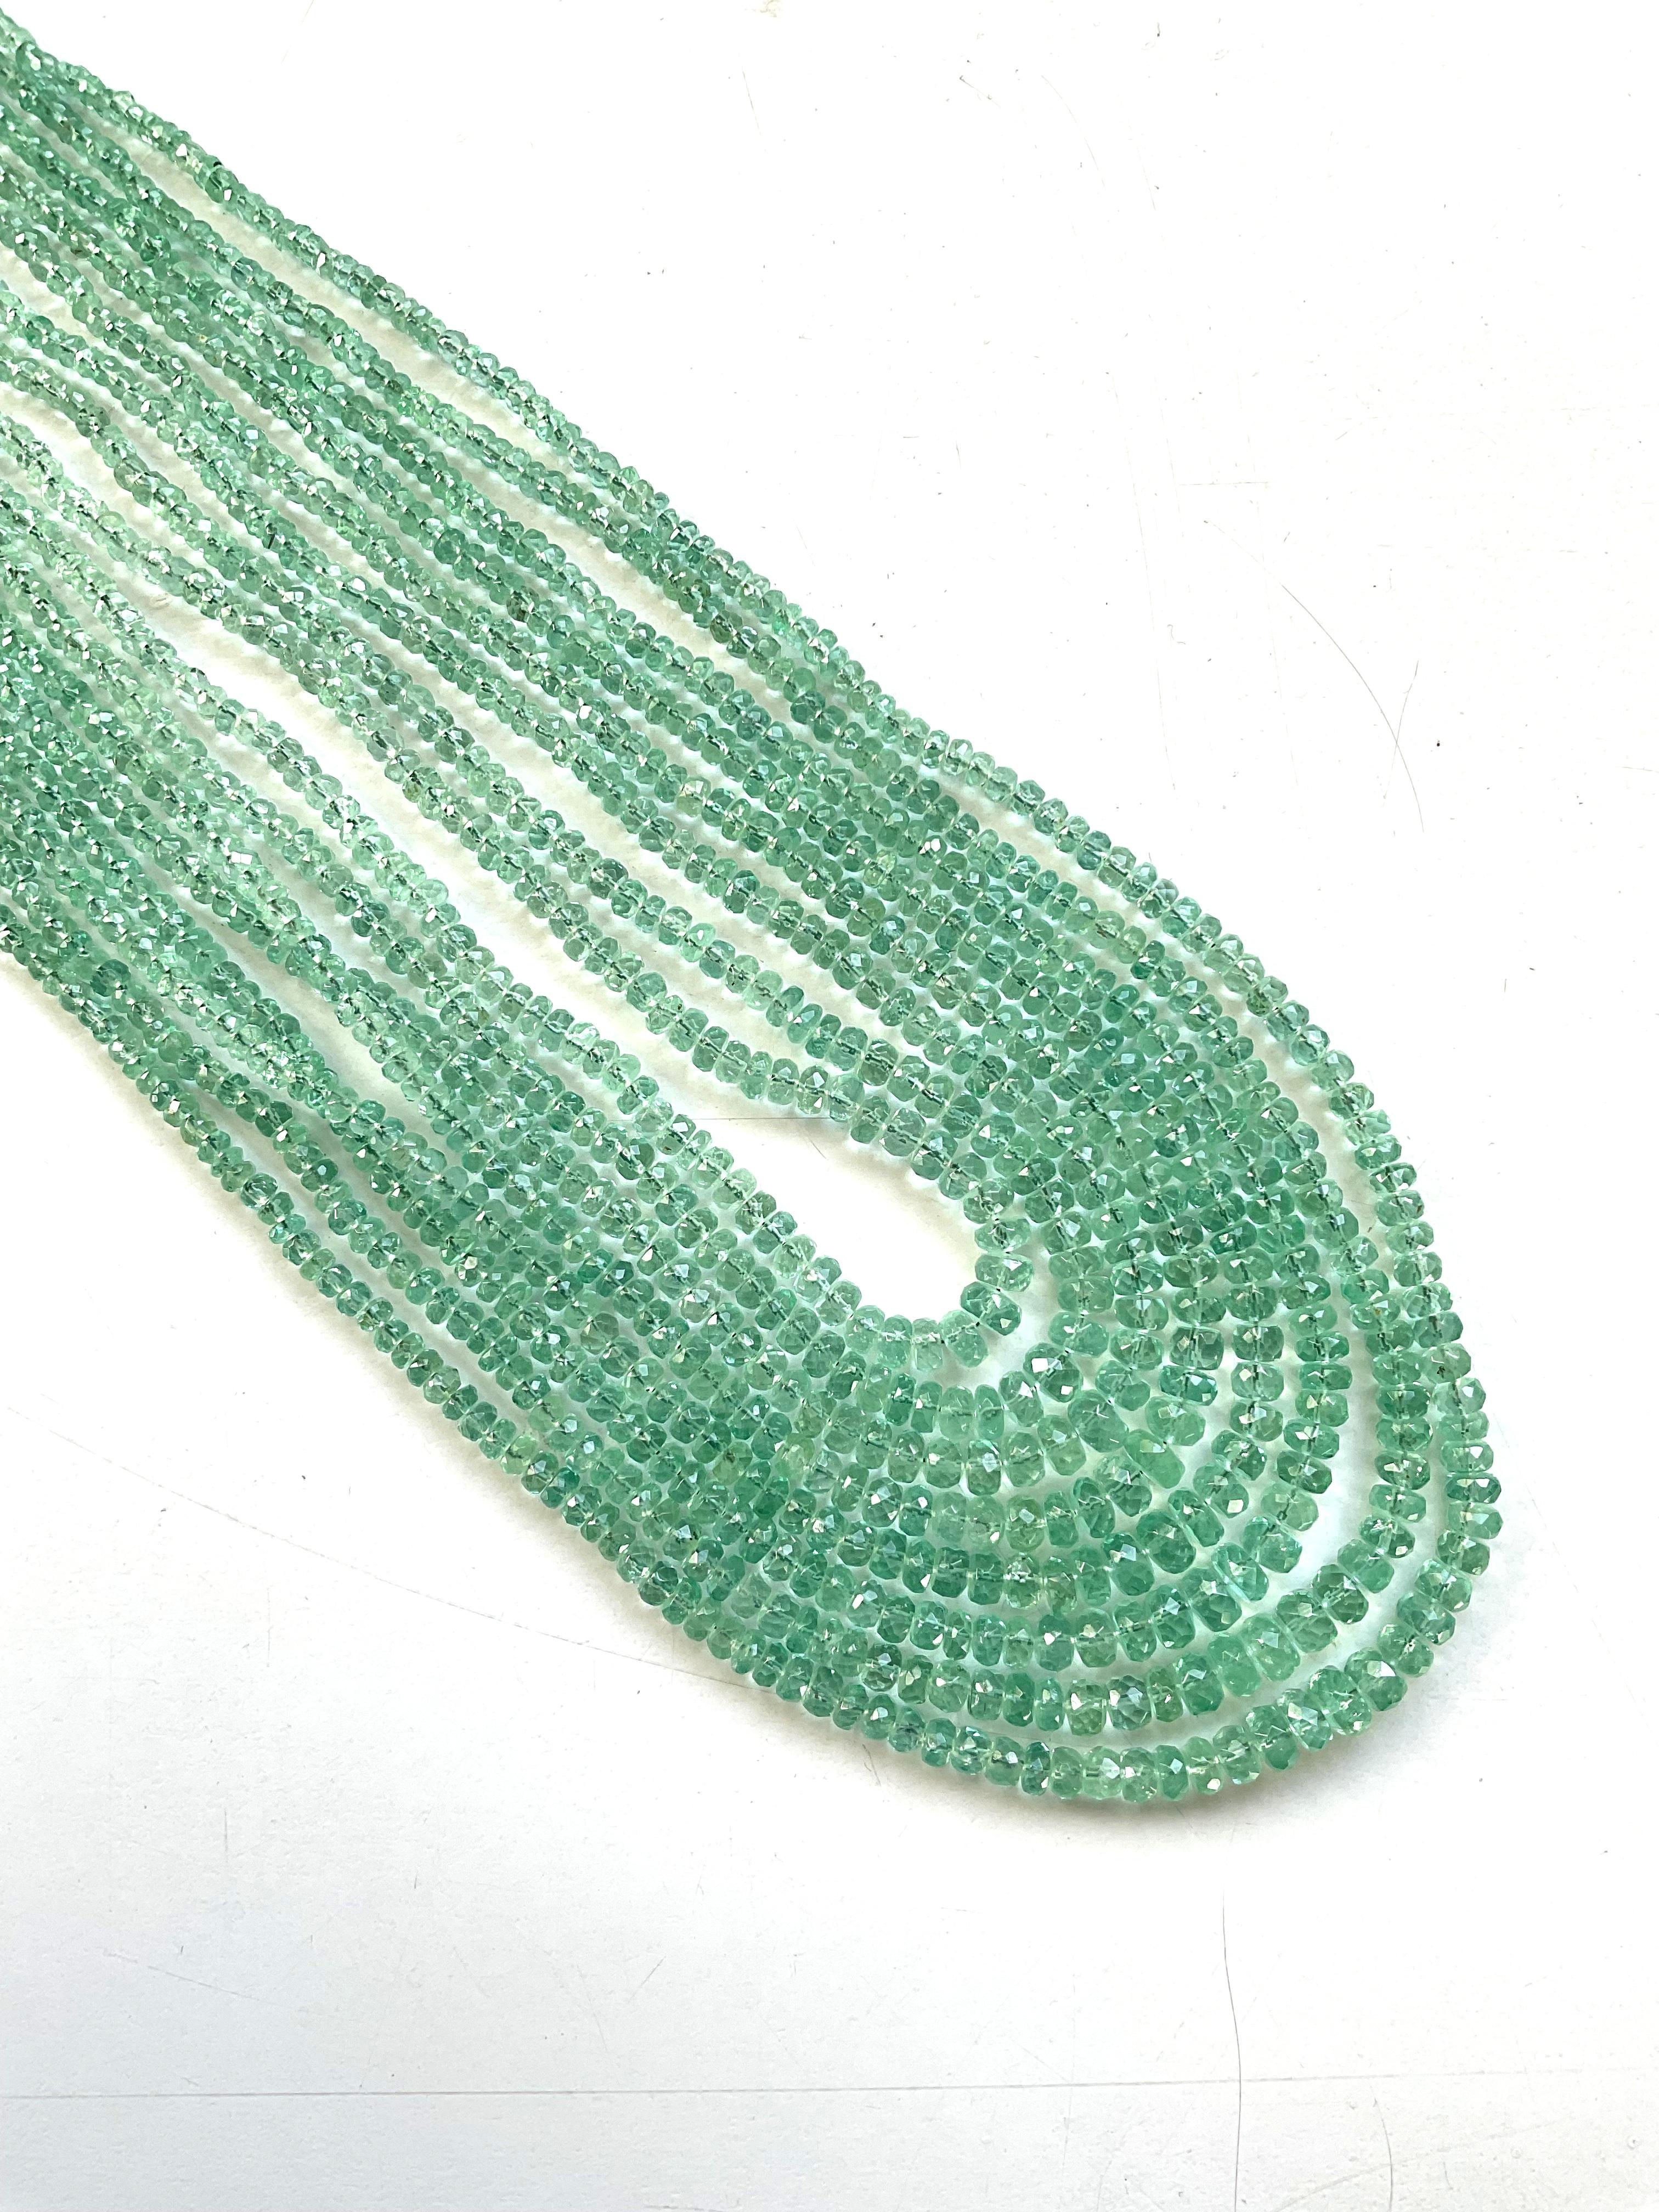 342.09 Carats Panjshir Emerald Faceted Beads For Fine Jewelry Natural Gemstone
Gemstone - Emerald
Weight - 342.09 carats
Shape - Beads
Size - 2.5 To 5 MM
Quantity - 8 line